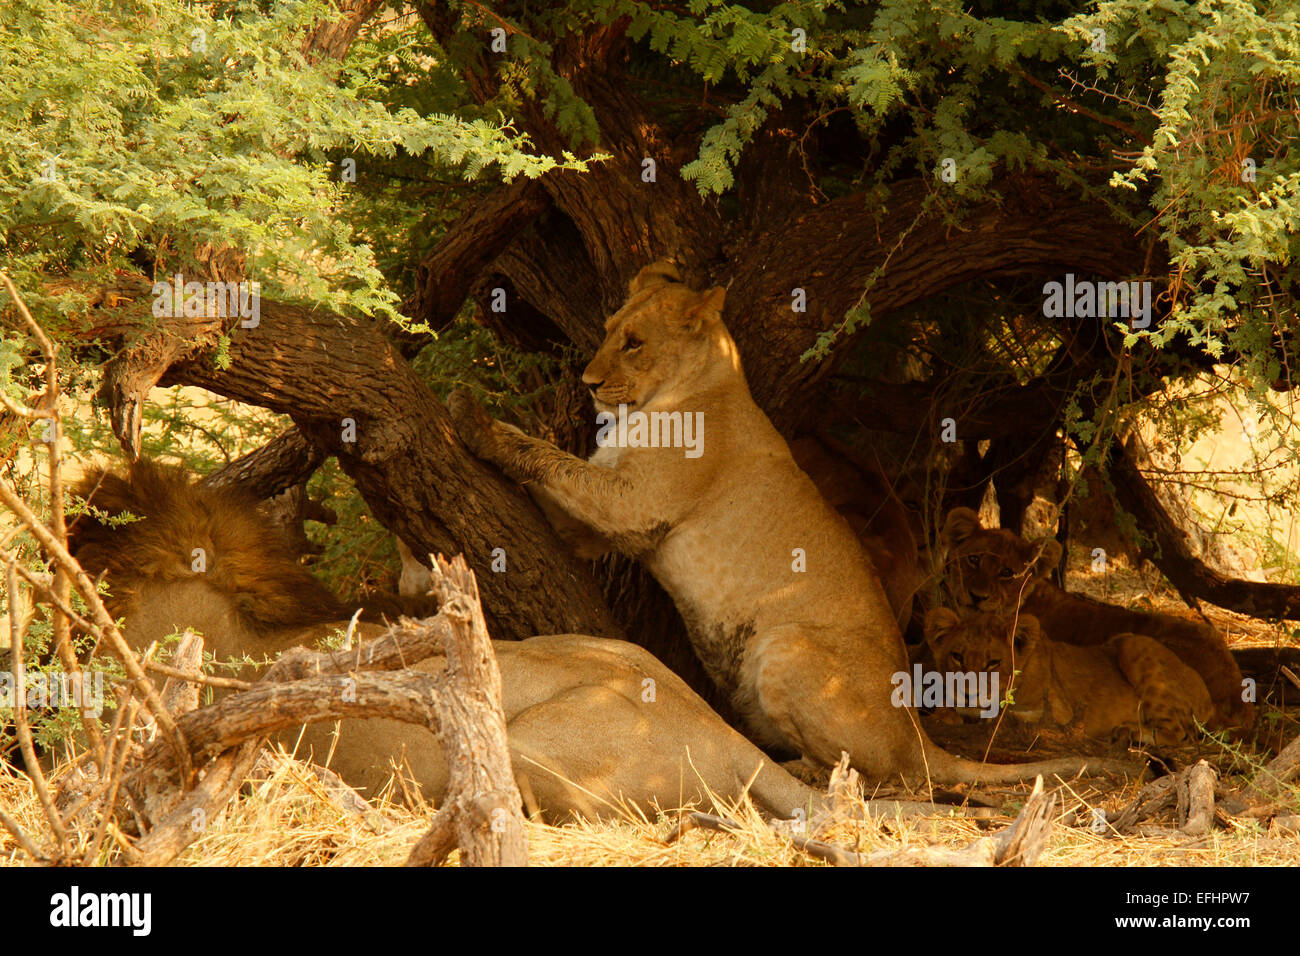 African Lions big male lion with two lion cubs in the shade of an Acacia thorn tree, one cub is using his claws on the tree Stock Photo